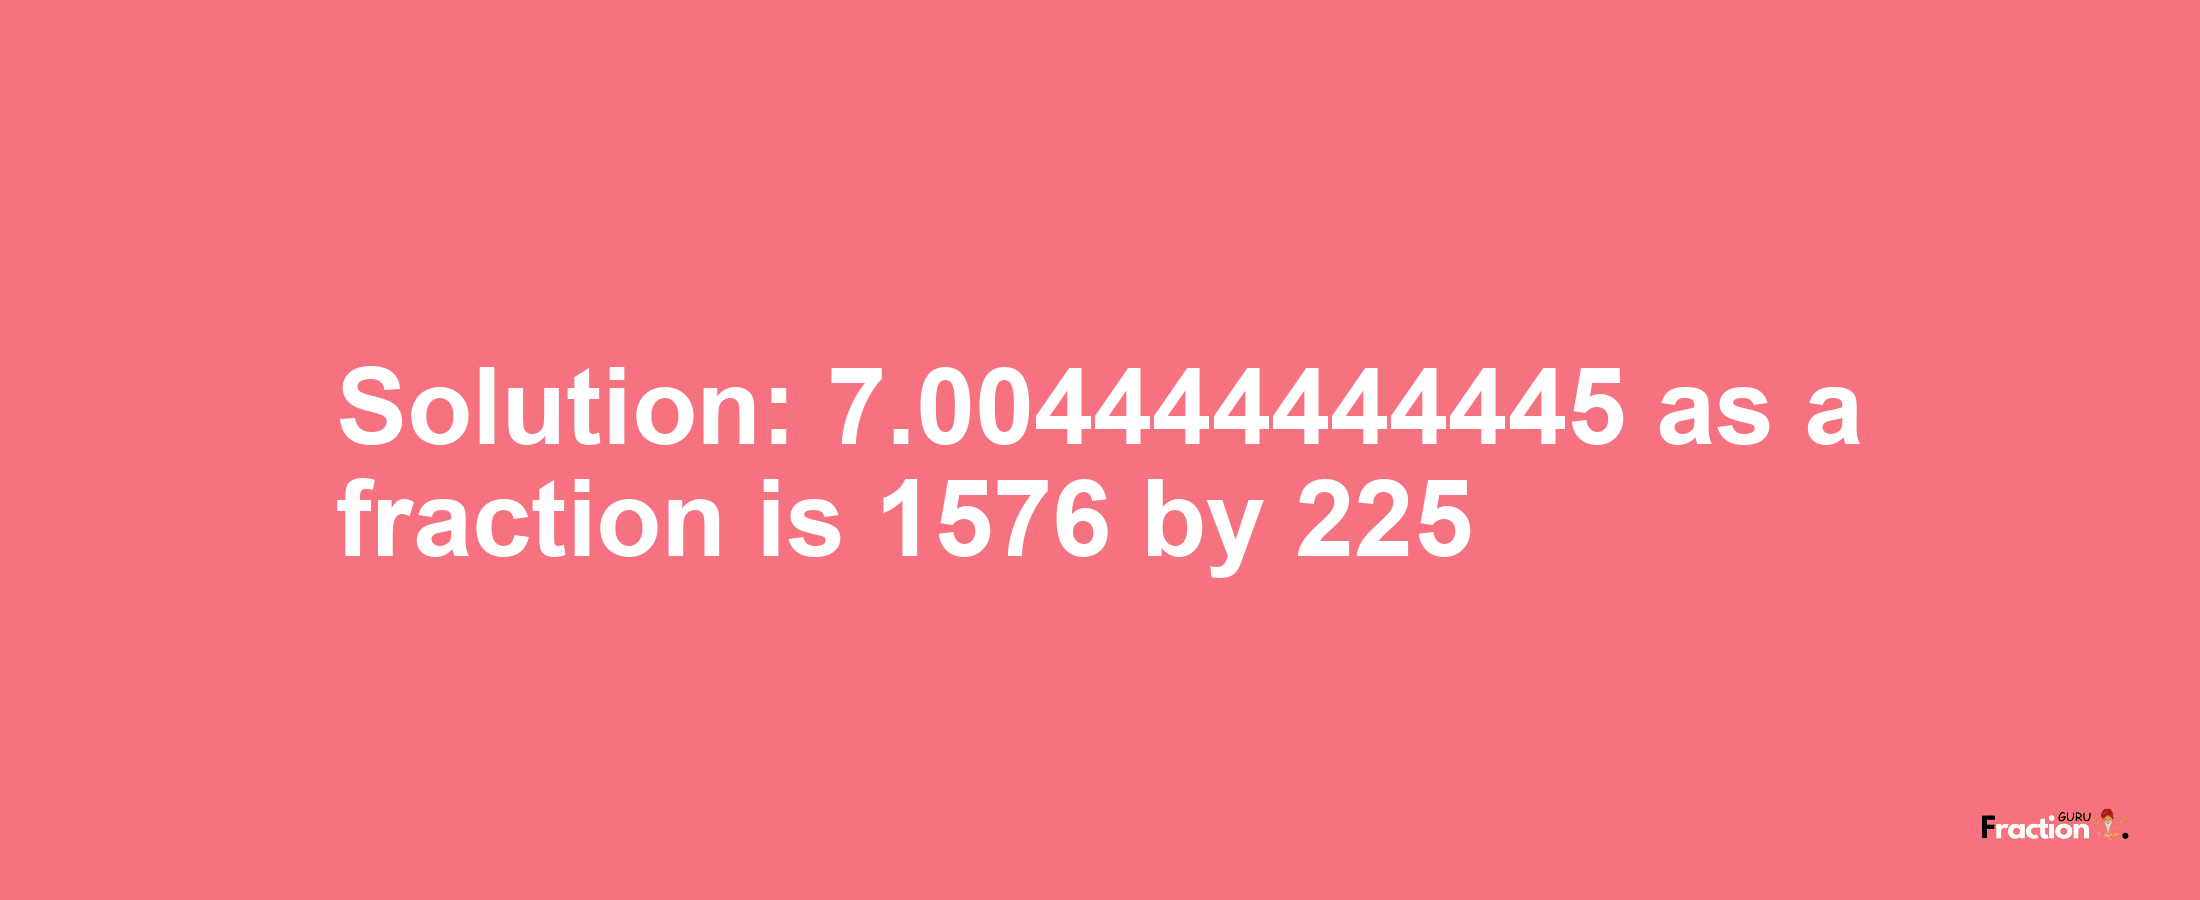 Solution:7.004444444445 as a fraction is 1576/225